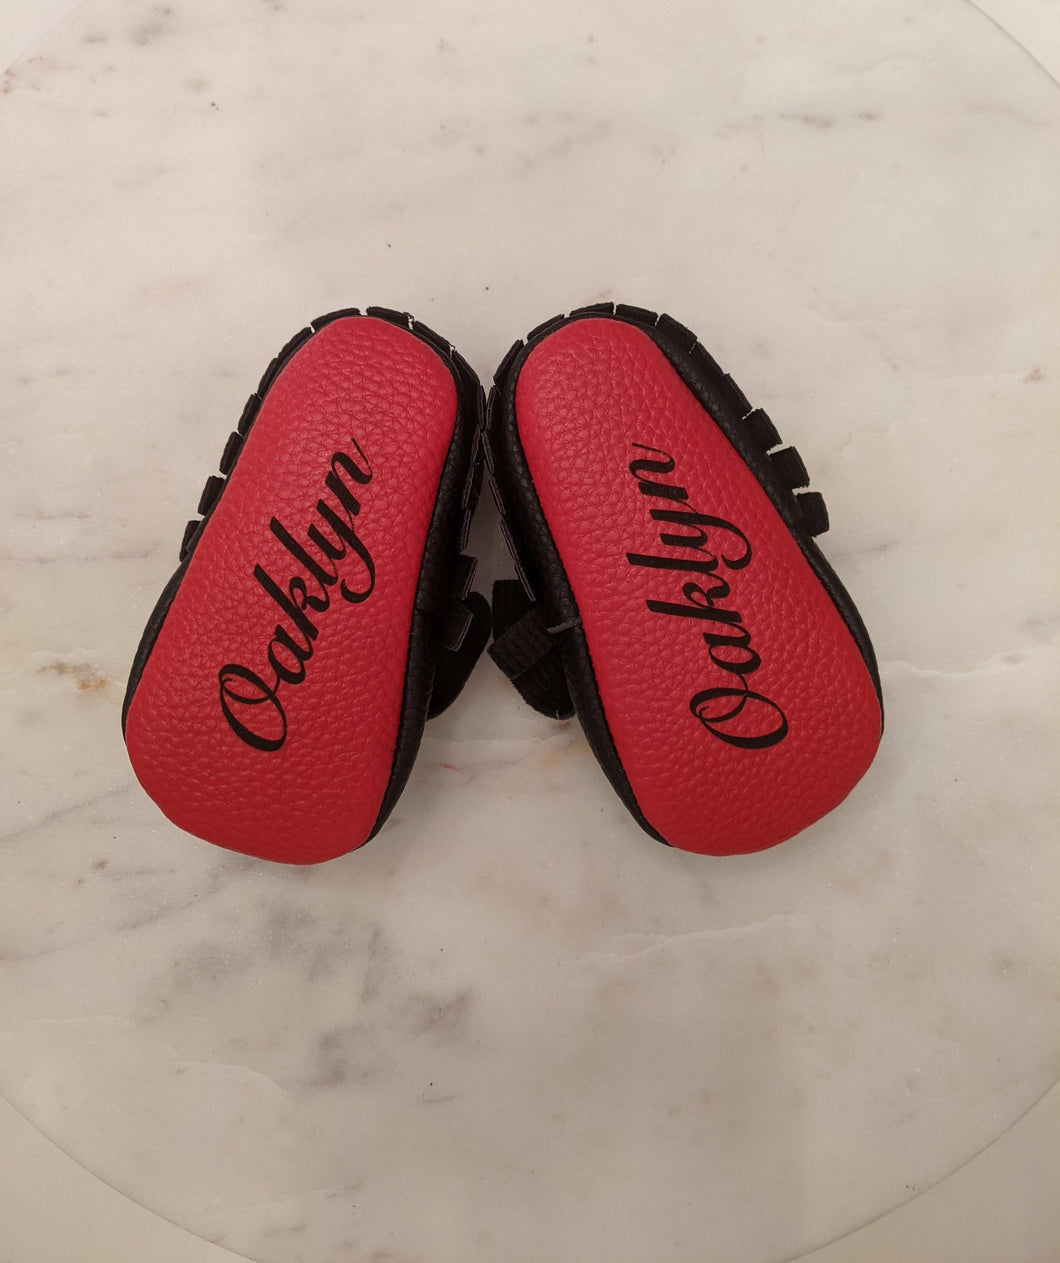 Add On: Personalized Baby Shoes Engraved Baby Gift Baby Moccasins Baby Shoes Moccasins Baby Boy Moccs Baby Moccasins Girls, Baby Shower